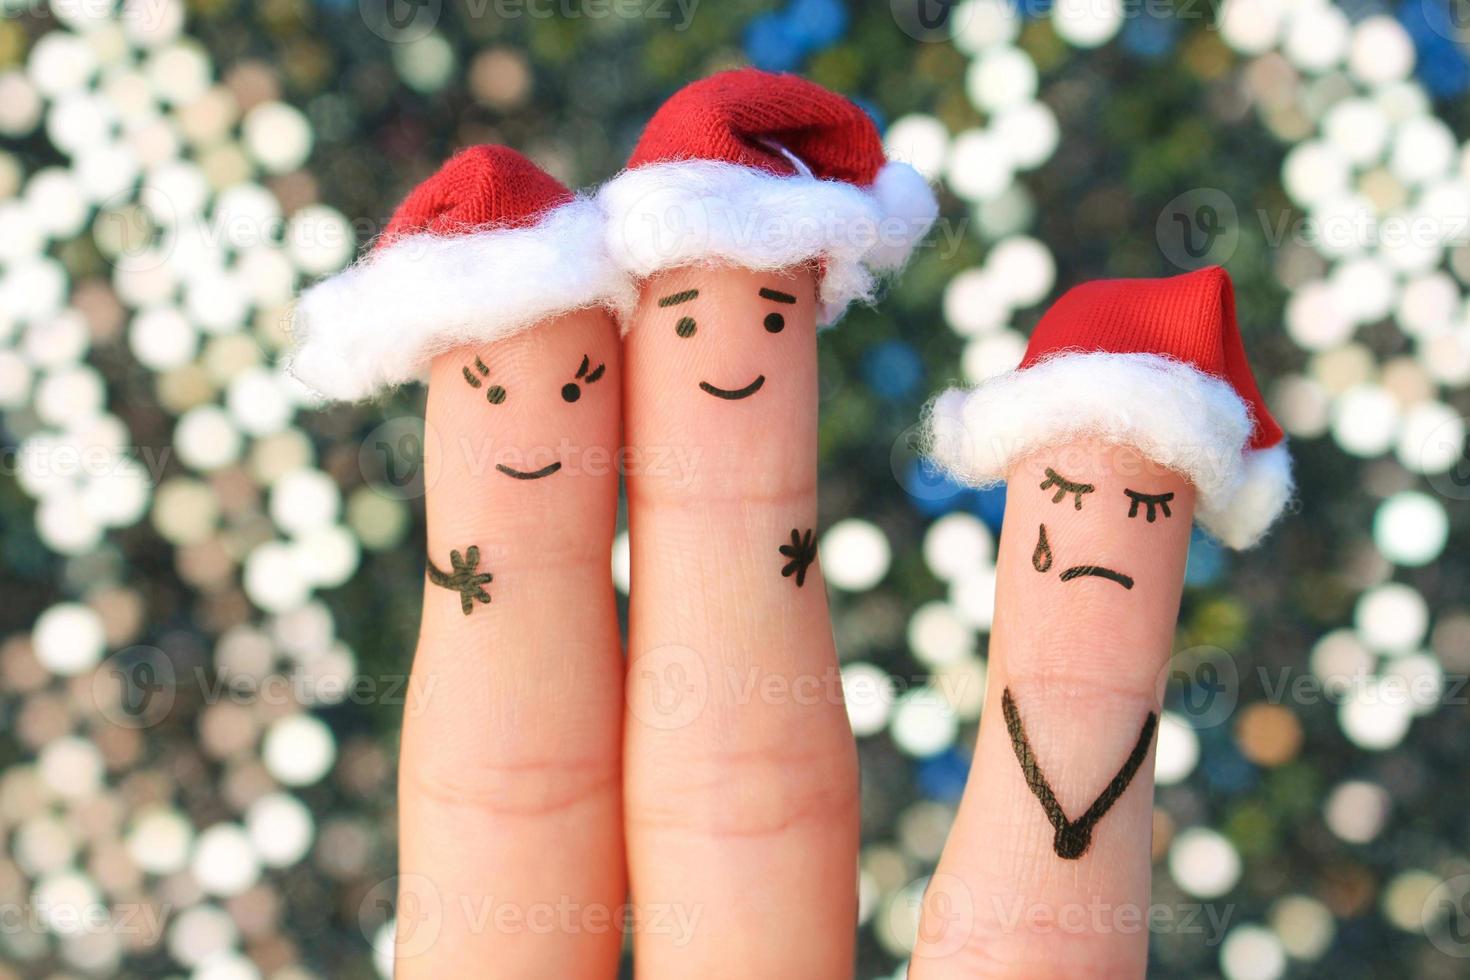 Fingers art of happy couple laughing in New Year hats. Woman is angry and jealous. Fingers art of couple celebrates Christmas. photo